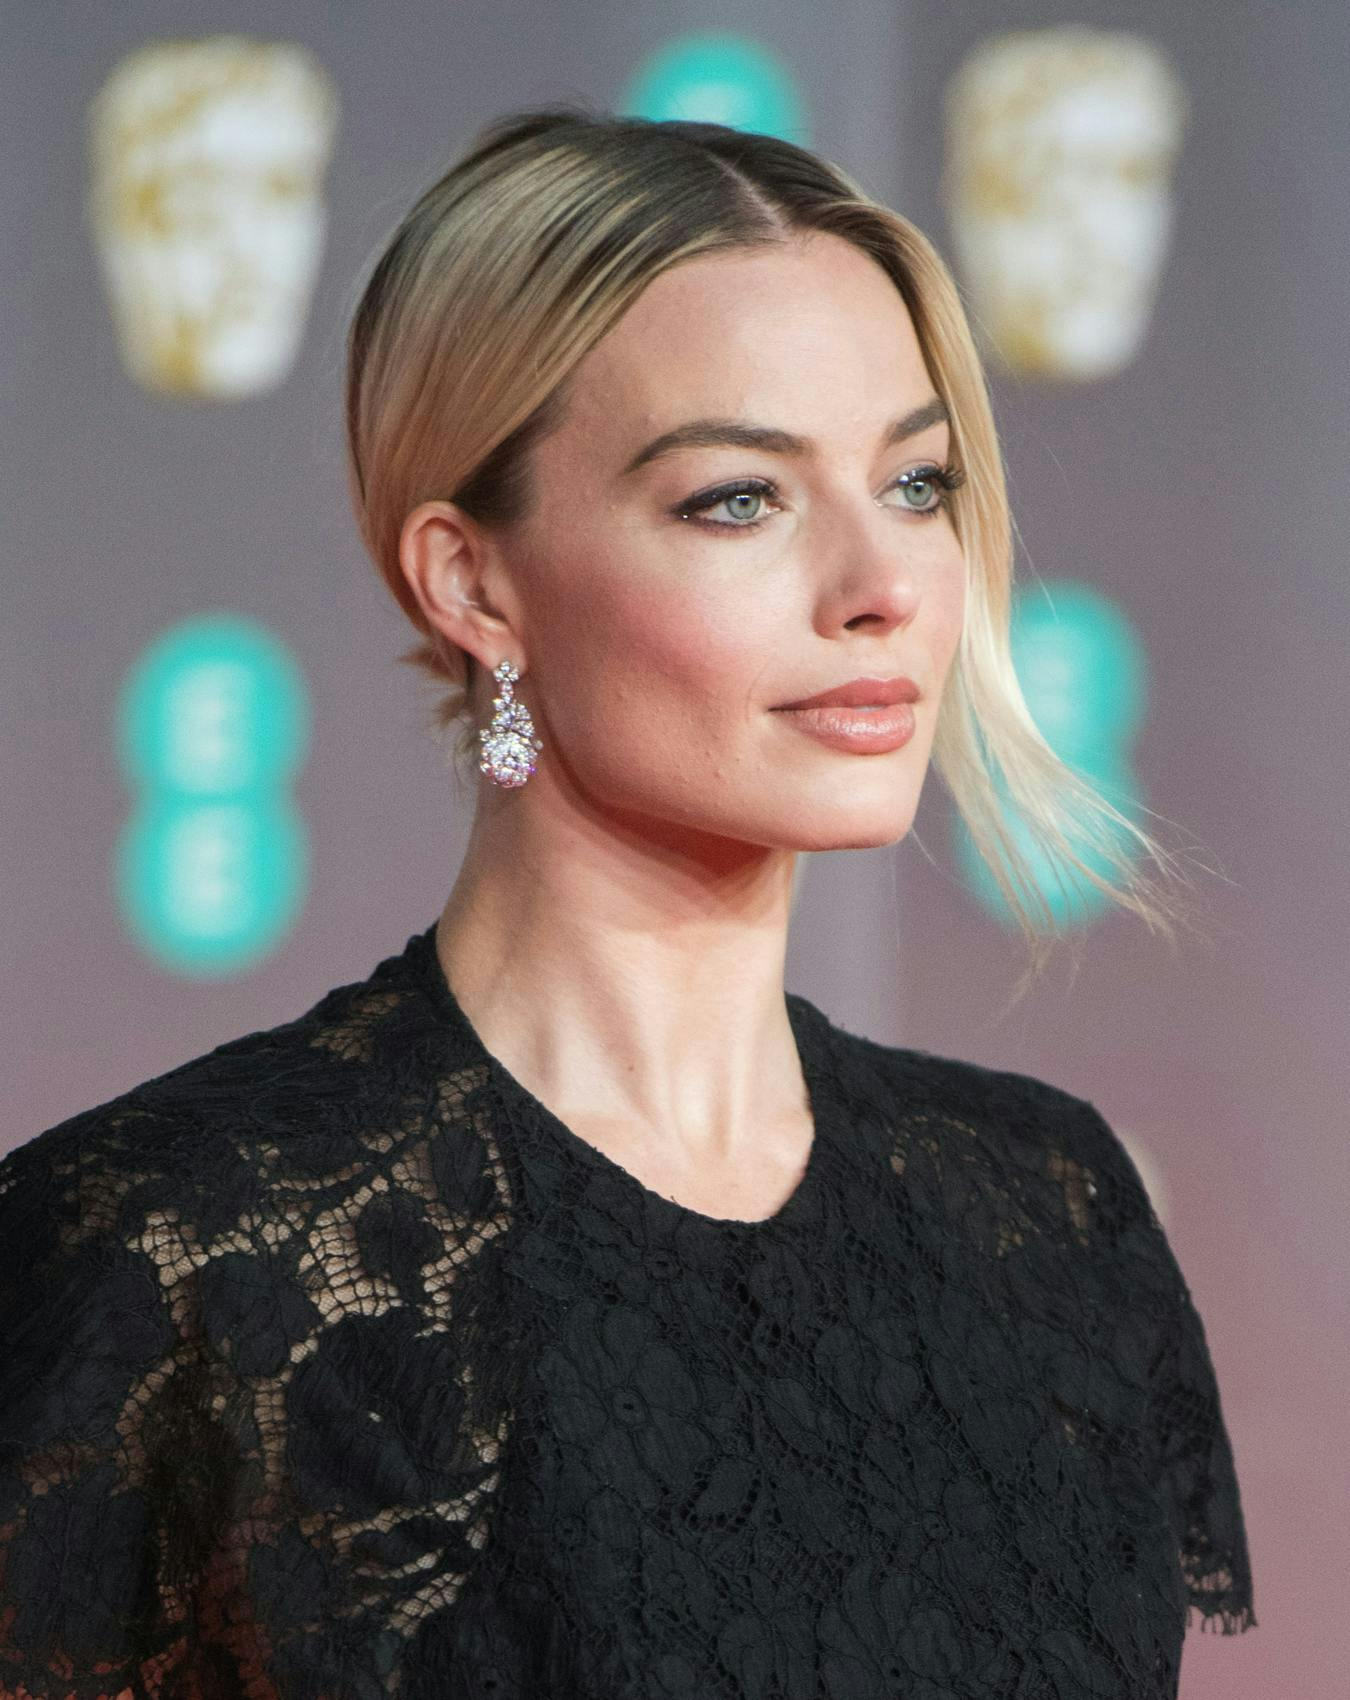 Margot Robbie attends the EE British Academy Film Awards 2020 at Royal Albert Hall on February 02, 2020 in London, England. Photo courtesy of Getty Images.